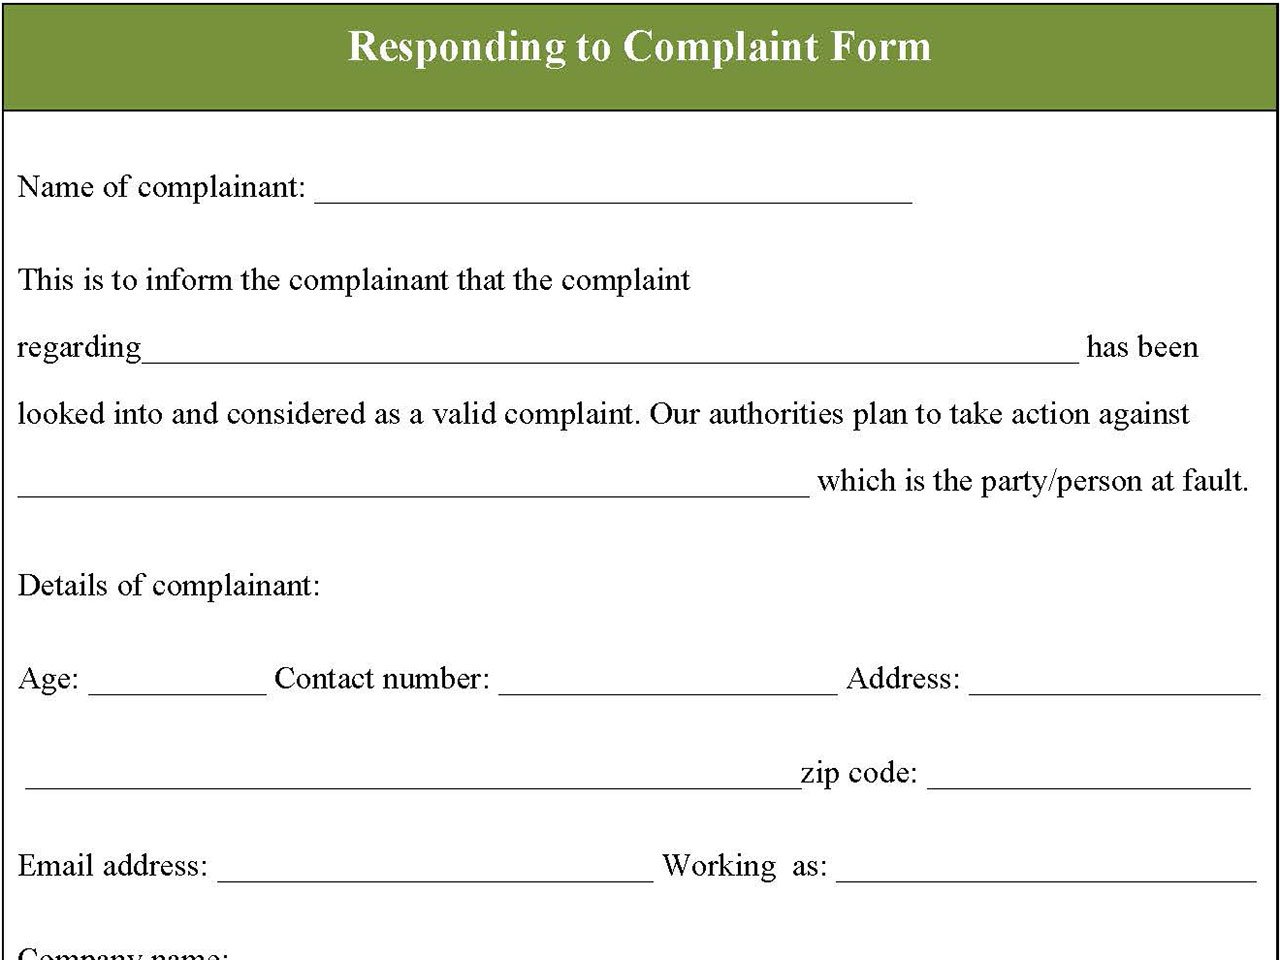 Responding to Complaint Form